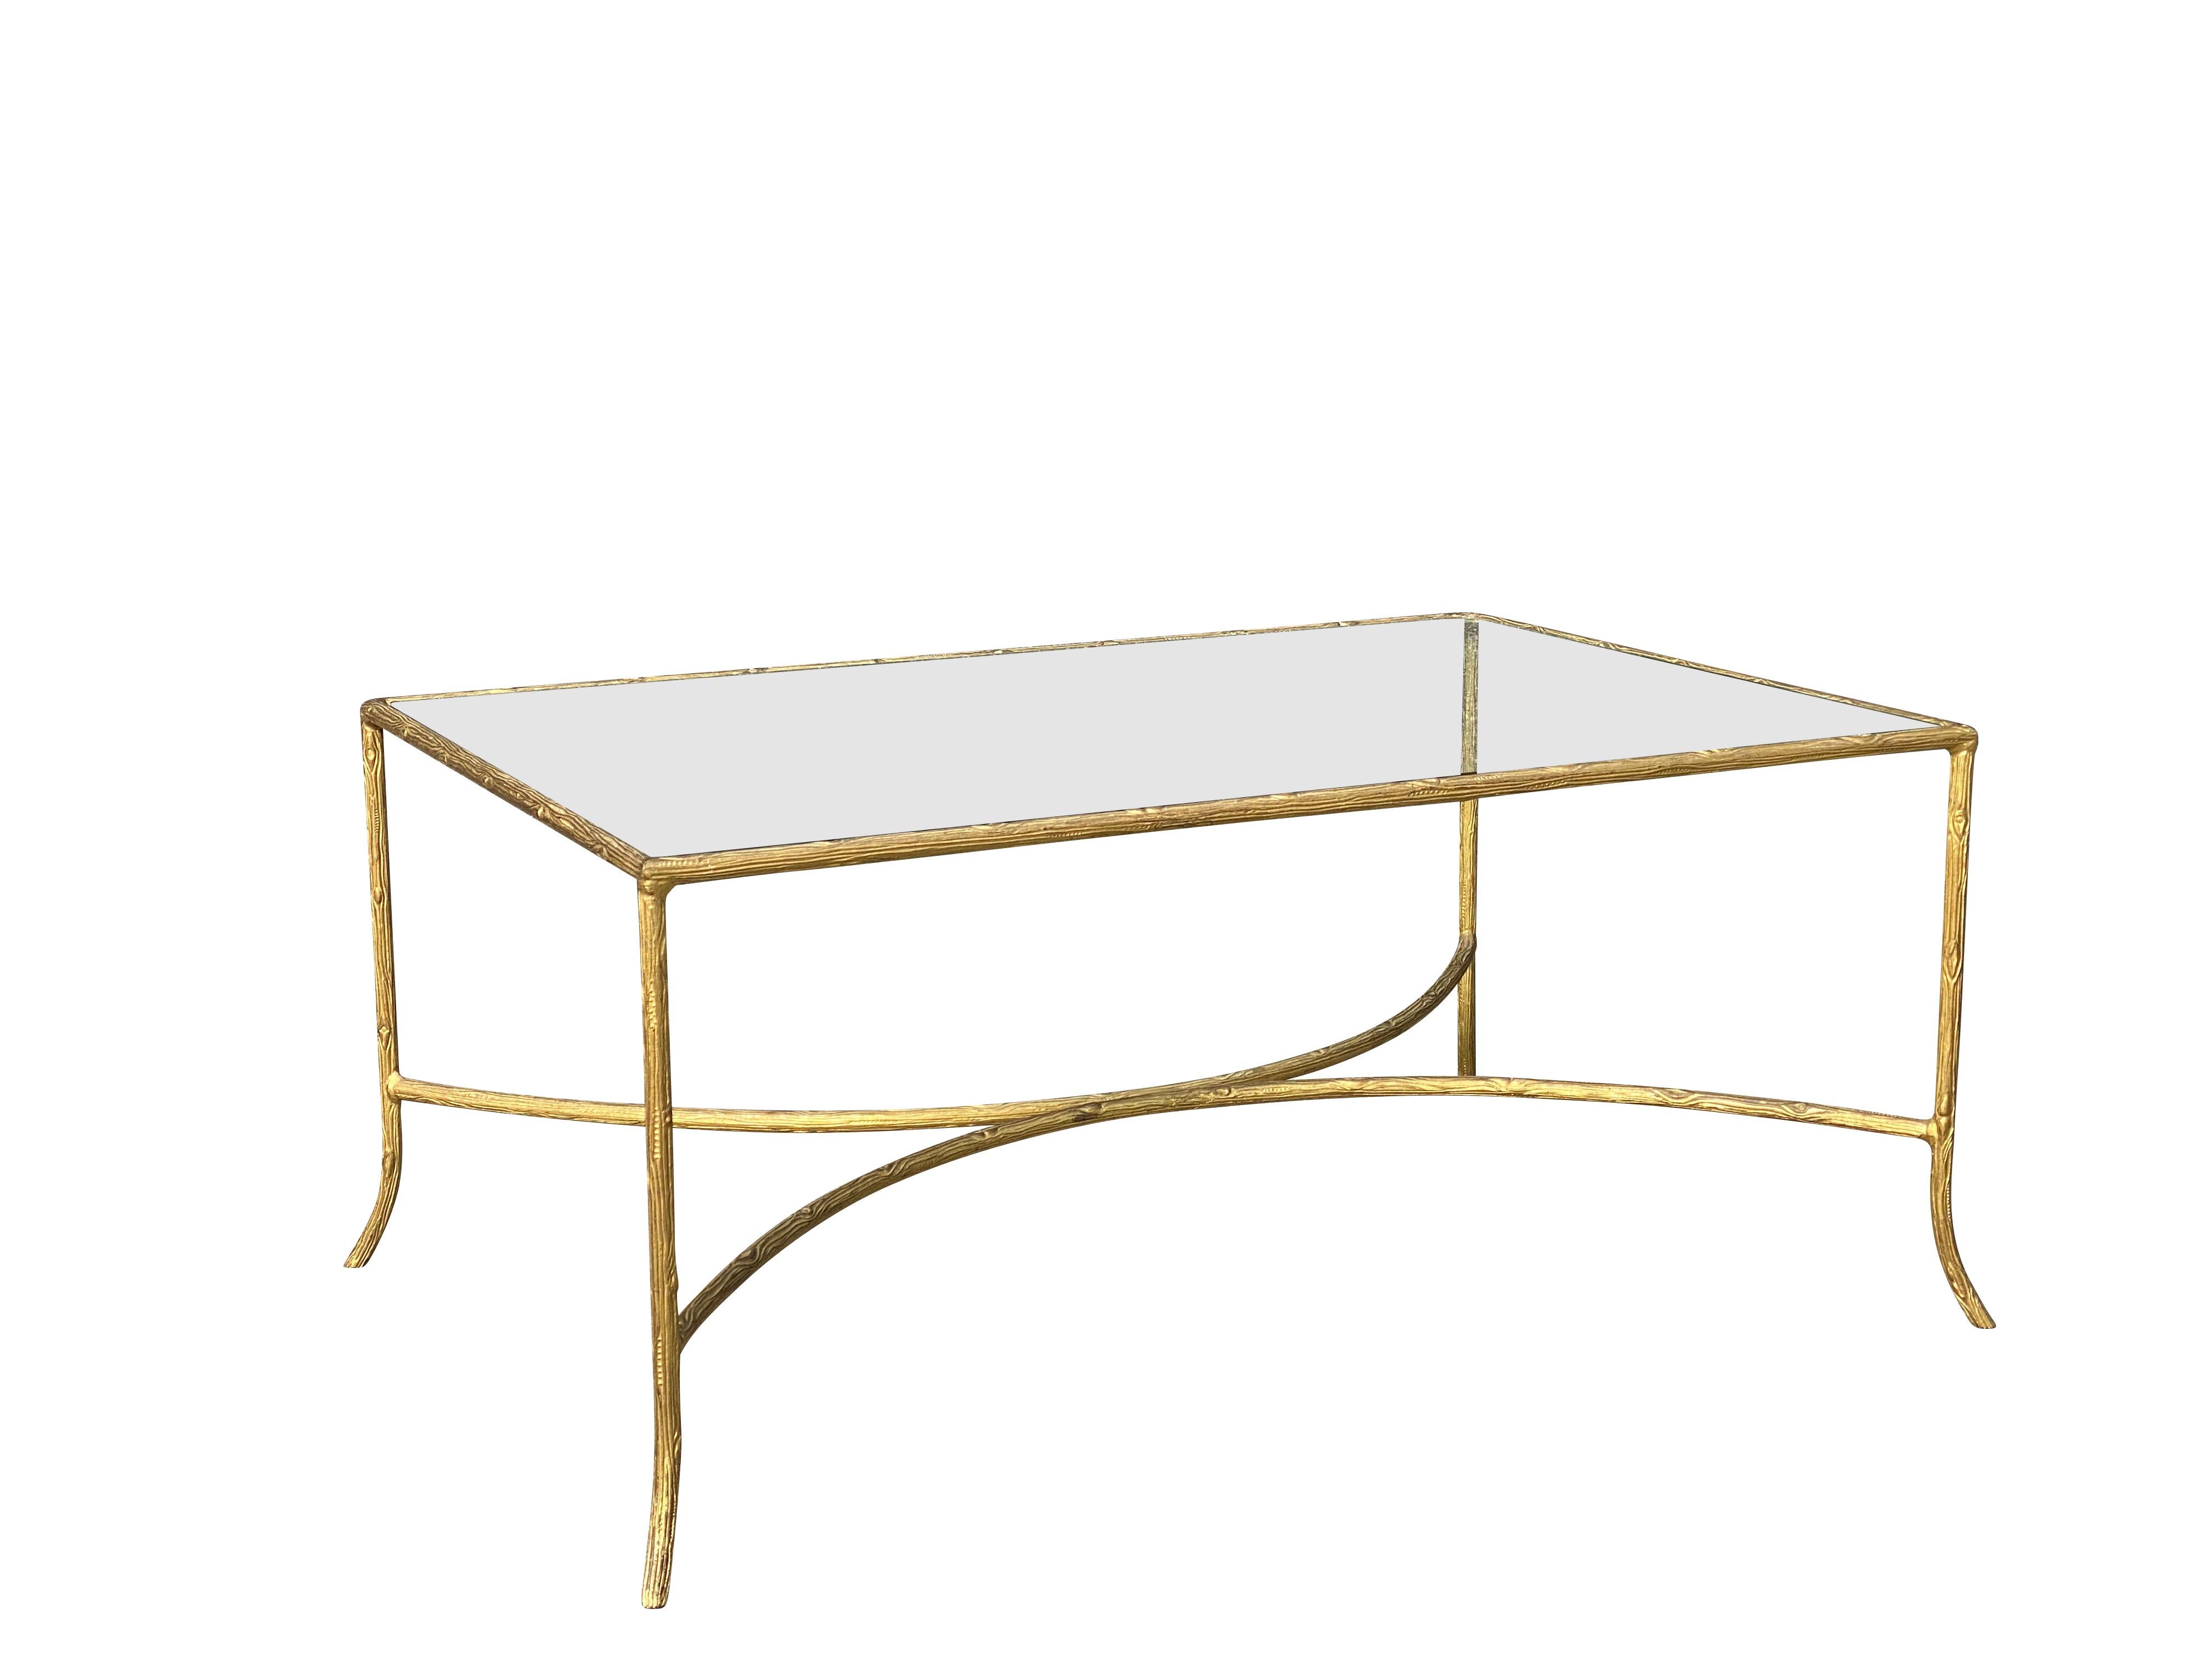 Rectangular glass top set in a cast faux bois frame, conforming legs and reverse C-stretcher.